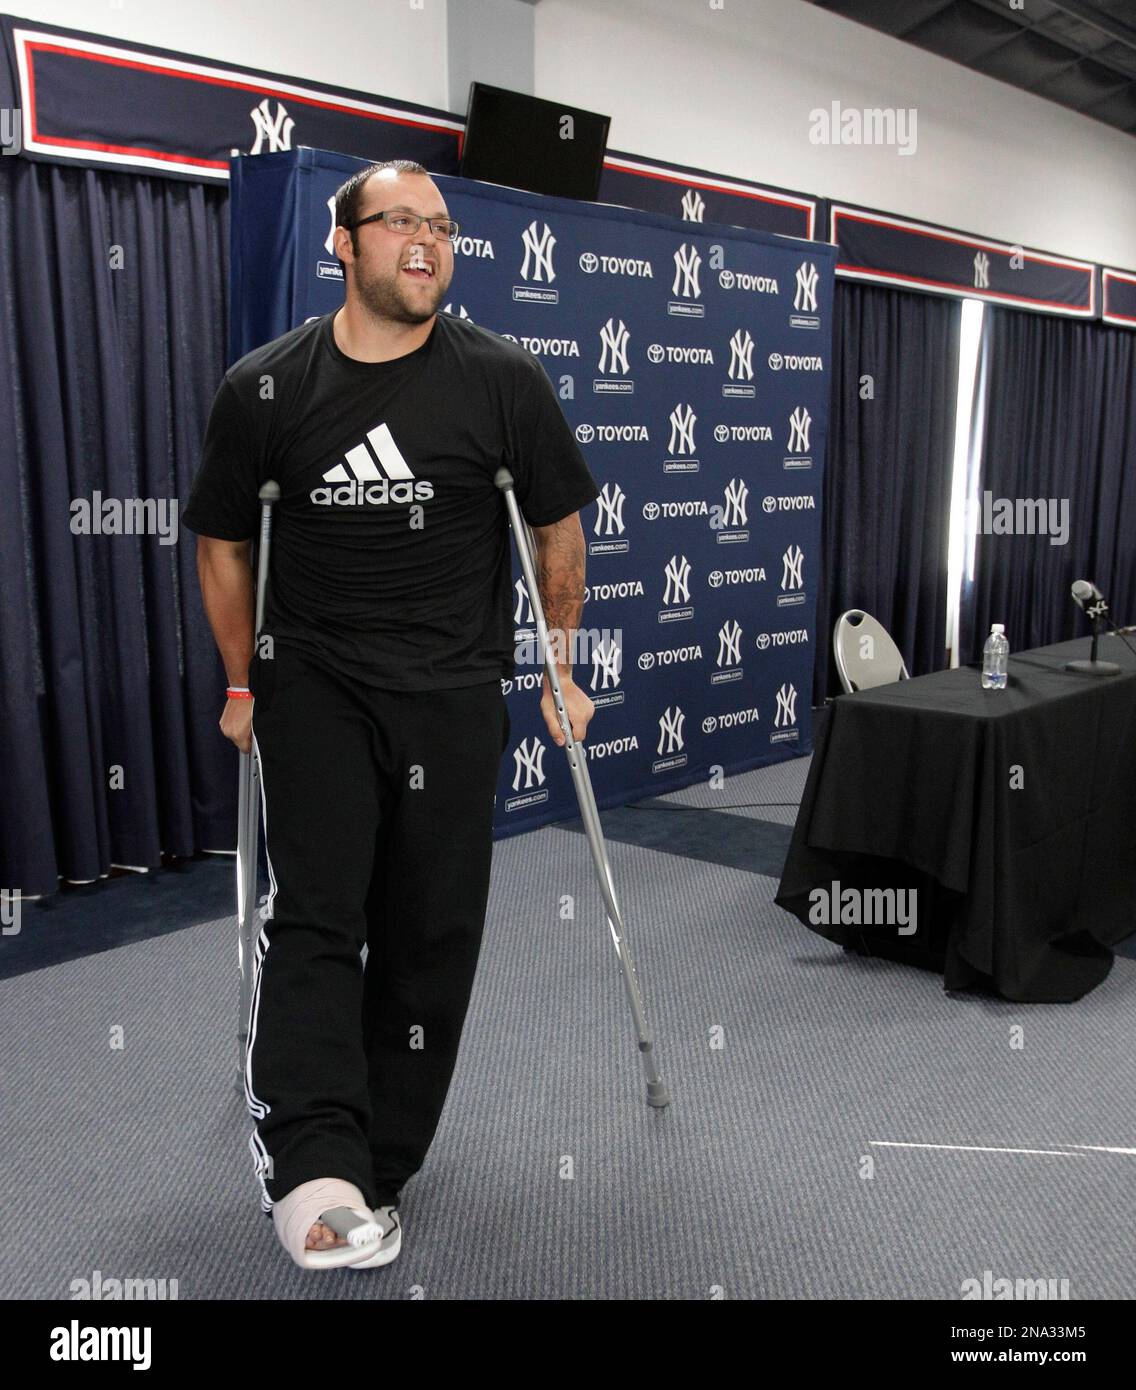 New York Yankees relief pitcher Joba Chamberlain walks on crutches after  speaking to reporters about his foot injury, in Tampa, Fla., Tuesday, March  27, 2012. Chamberlain hurt his foot jumping on a